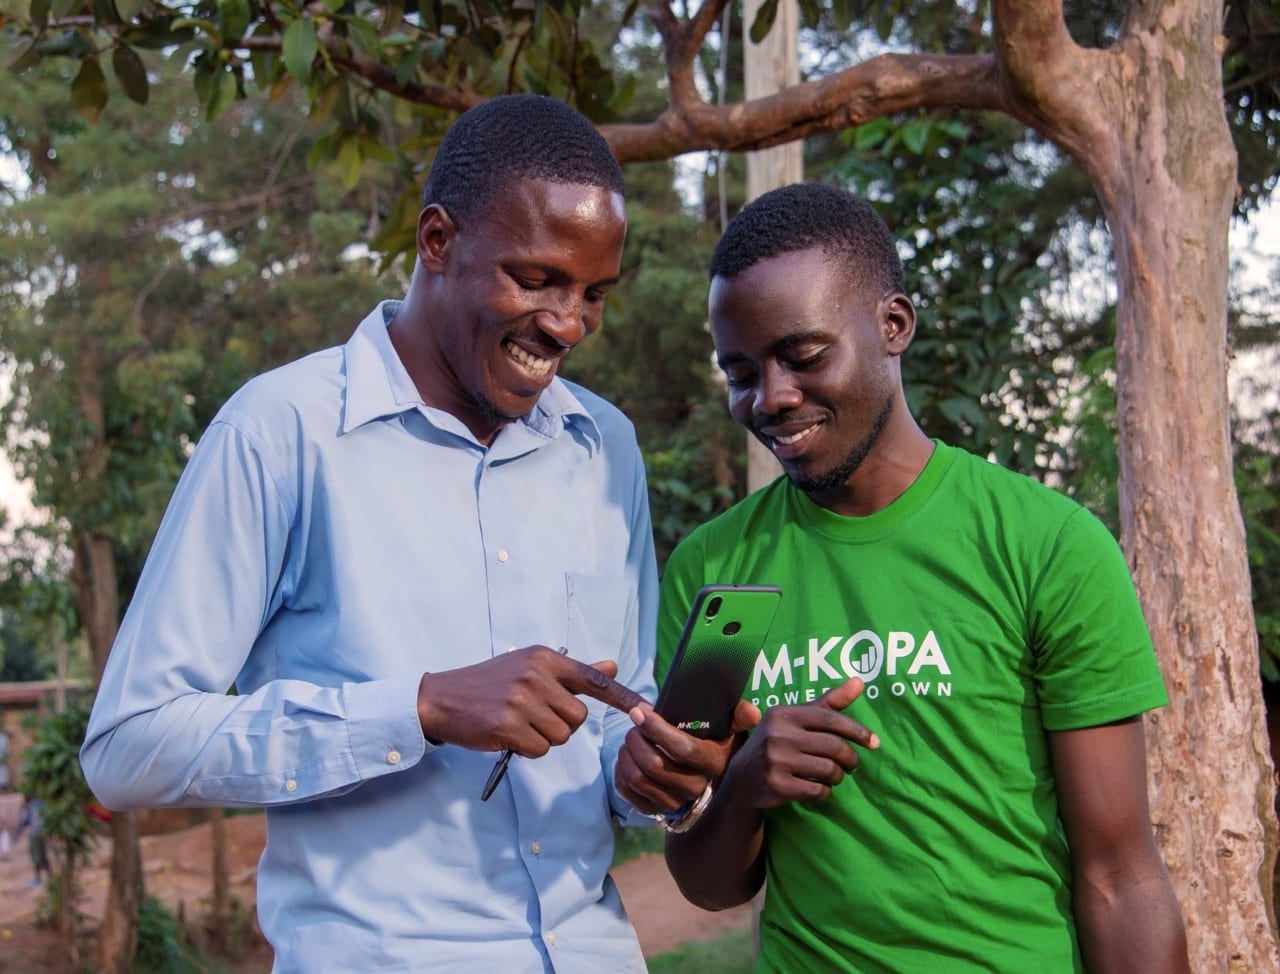 M-Kopa raises KES 8.5 Billion equity funding to expand to more countries